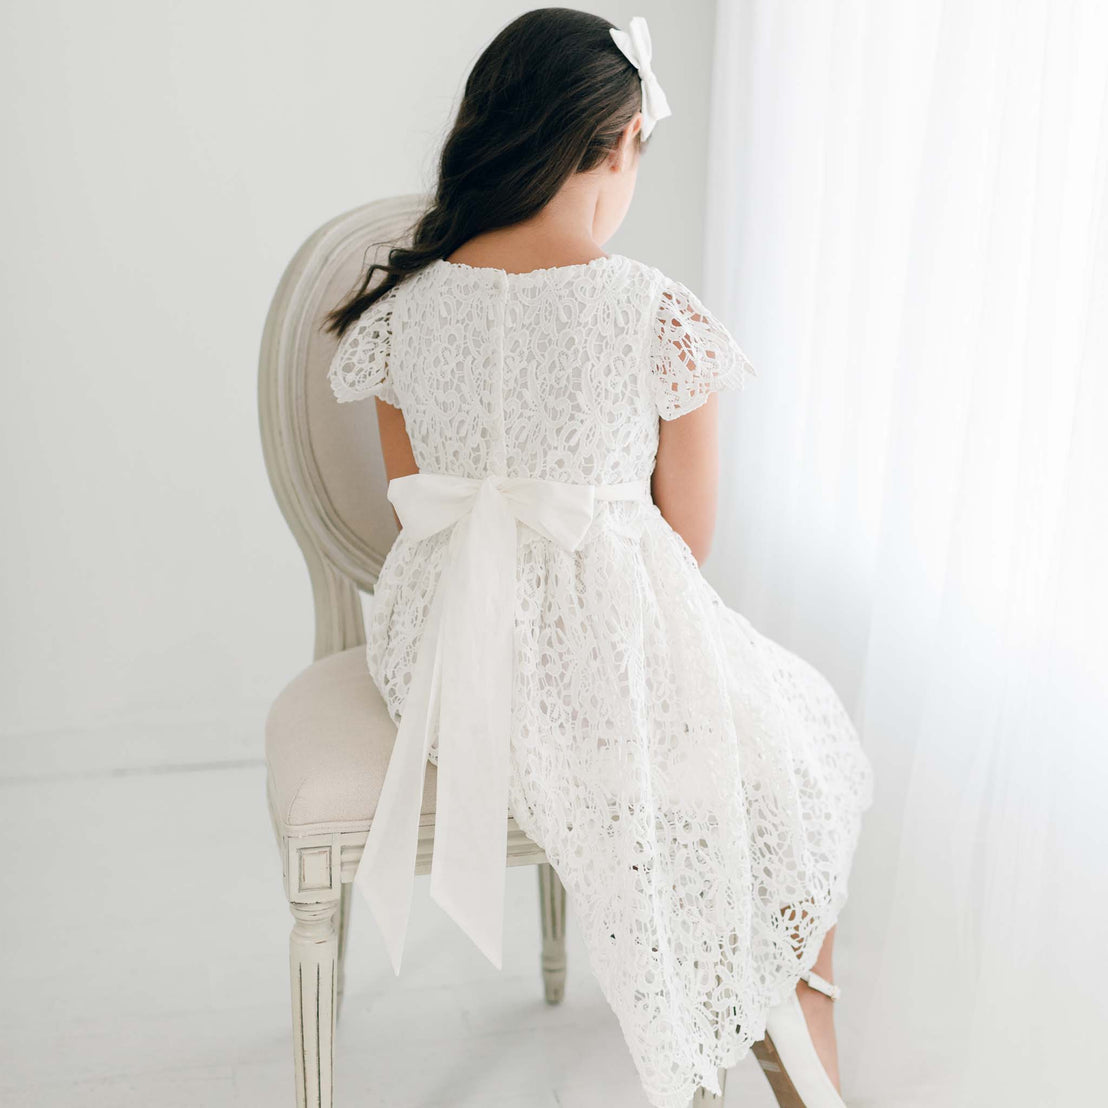 An adolescent girl wearing the Lola Girls Lace Dress. Made with cotton lining in light ivory and adorned with an all-over embroidered lace, plus a lace bodice, lacey cap sleeves, and buttons in back. Detail shows sash ties on the sides tied together.